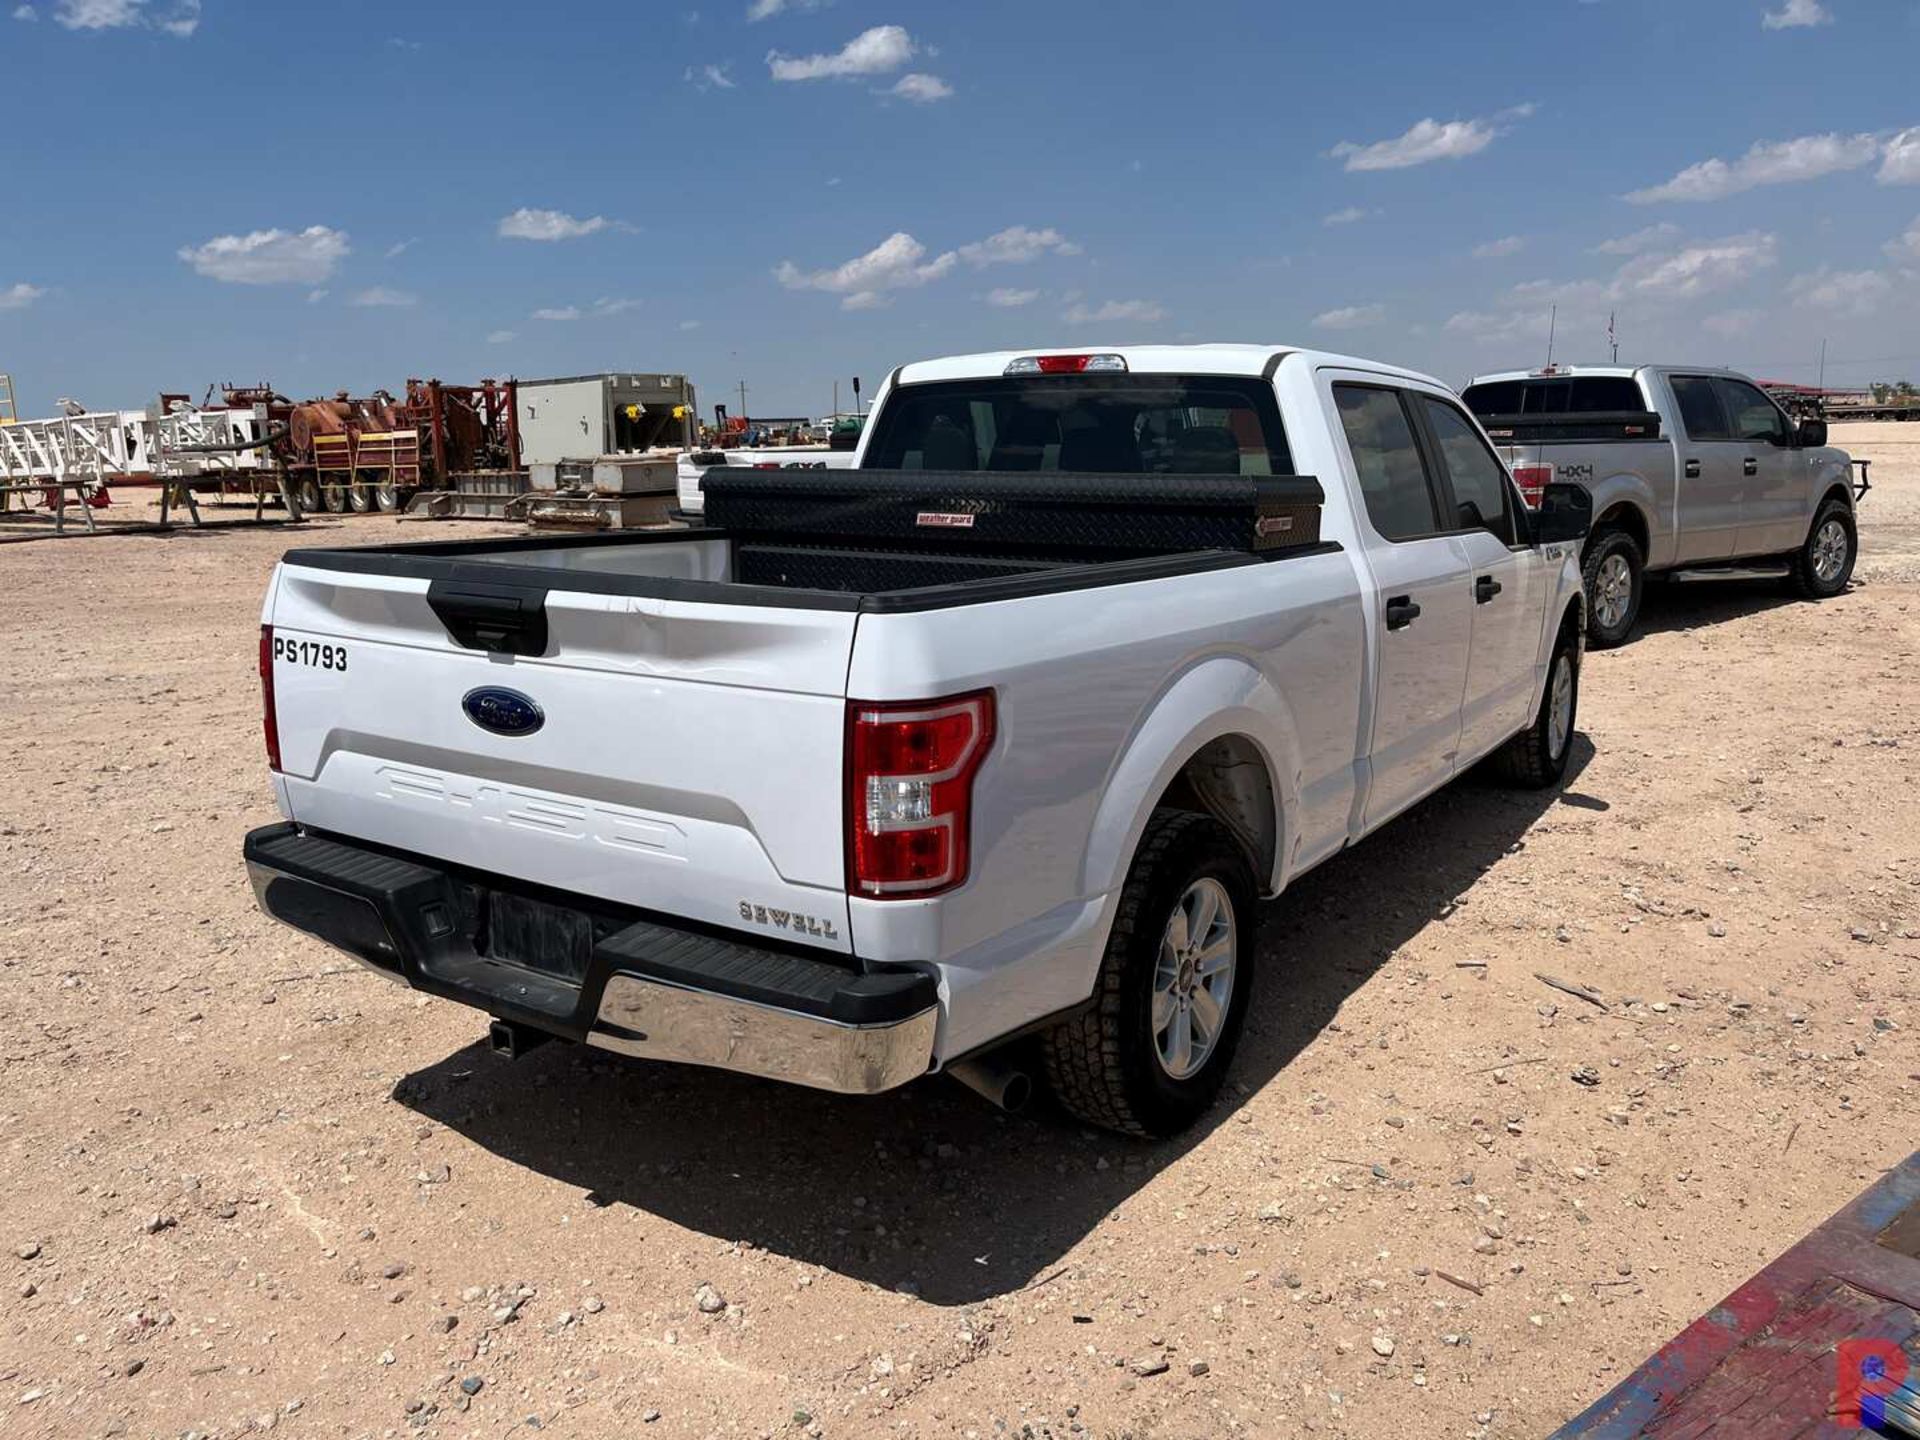 2019 FORD F-150 CREW CAB PICKUP TRUCK - Image 3 of 7